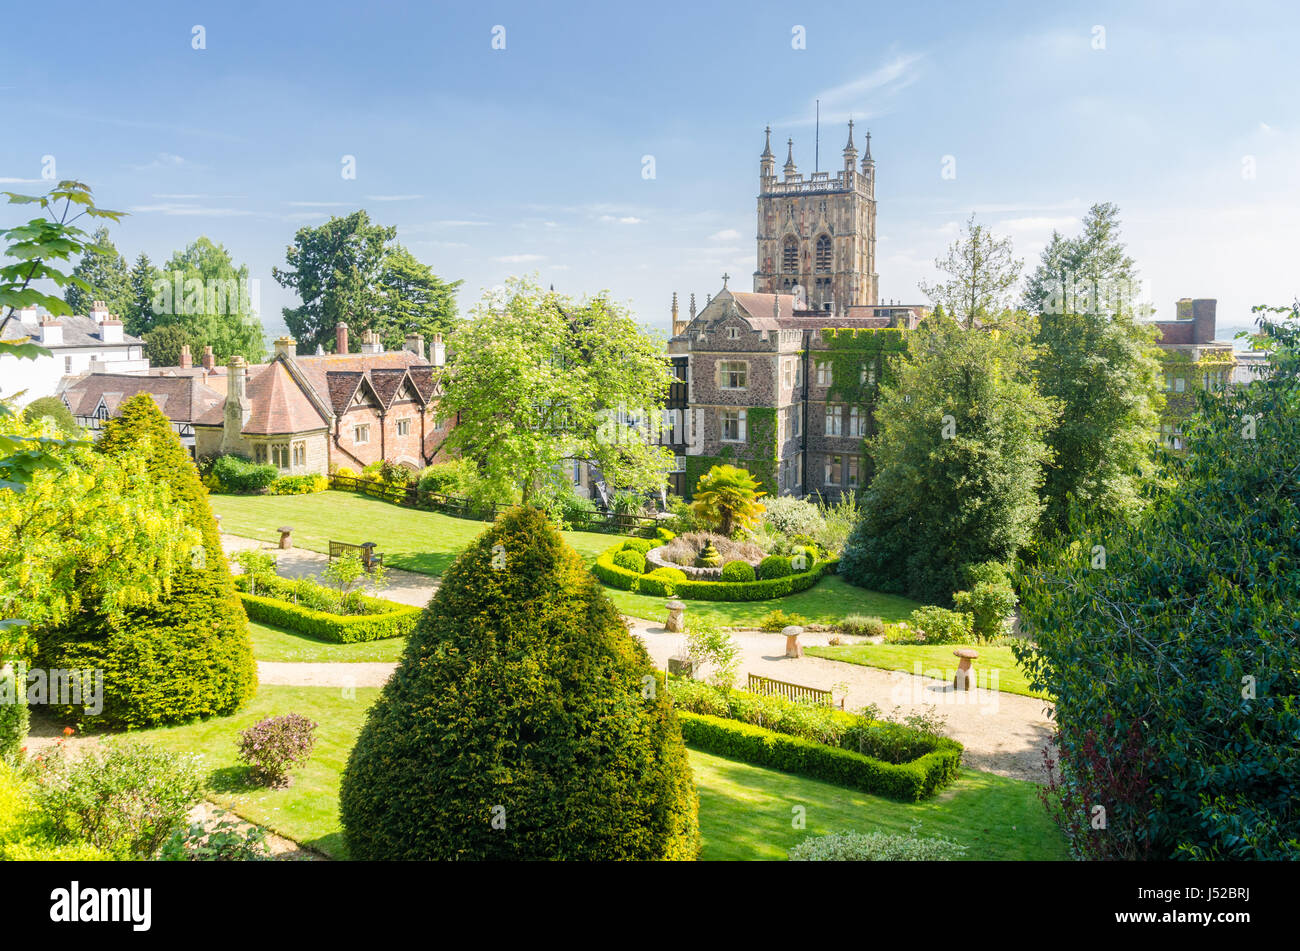 View of Great Malvern Priory and Abbey Gardens in Great Malvern, Worcestershire Stock Photo